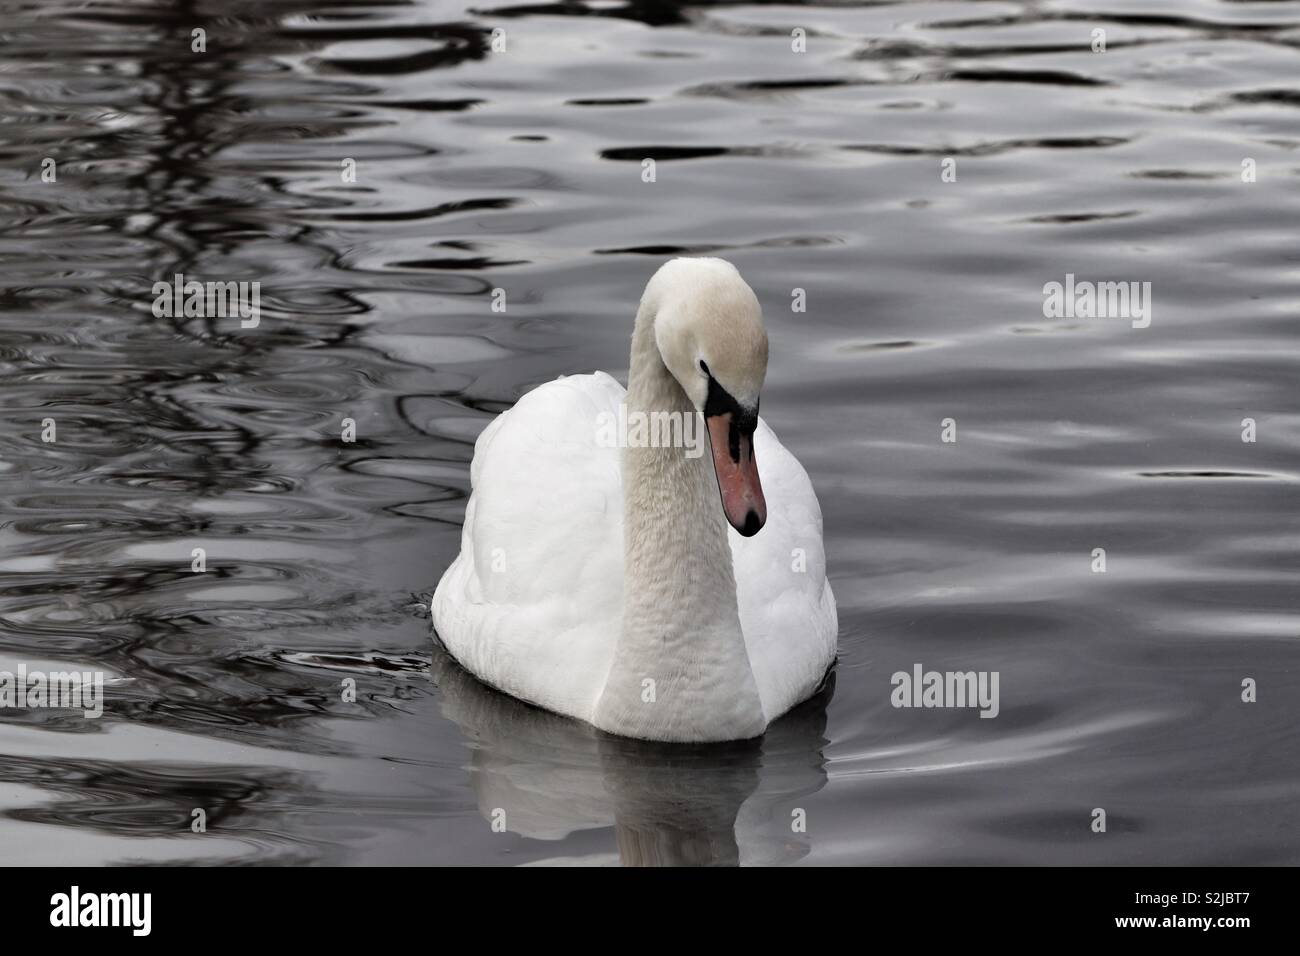 Swan swimming on the water Stock Photo